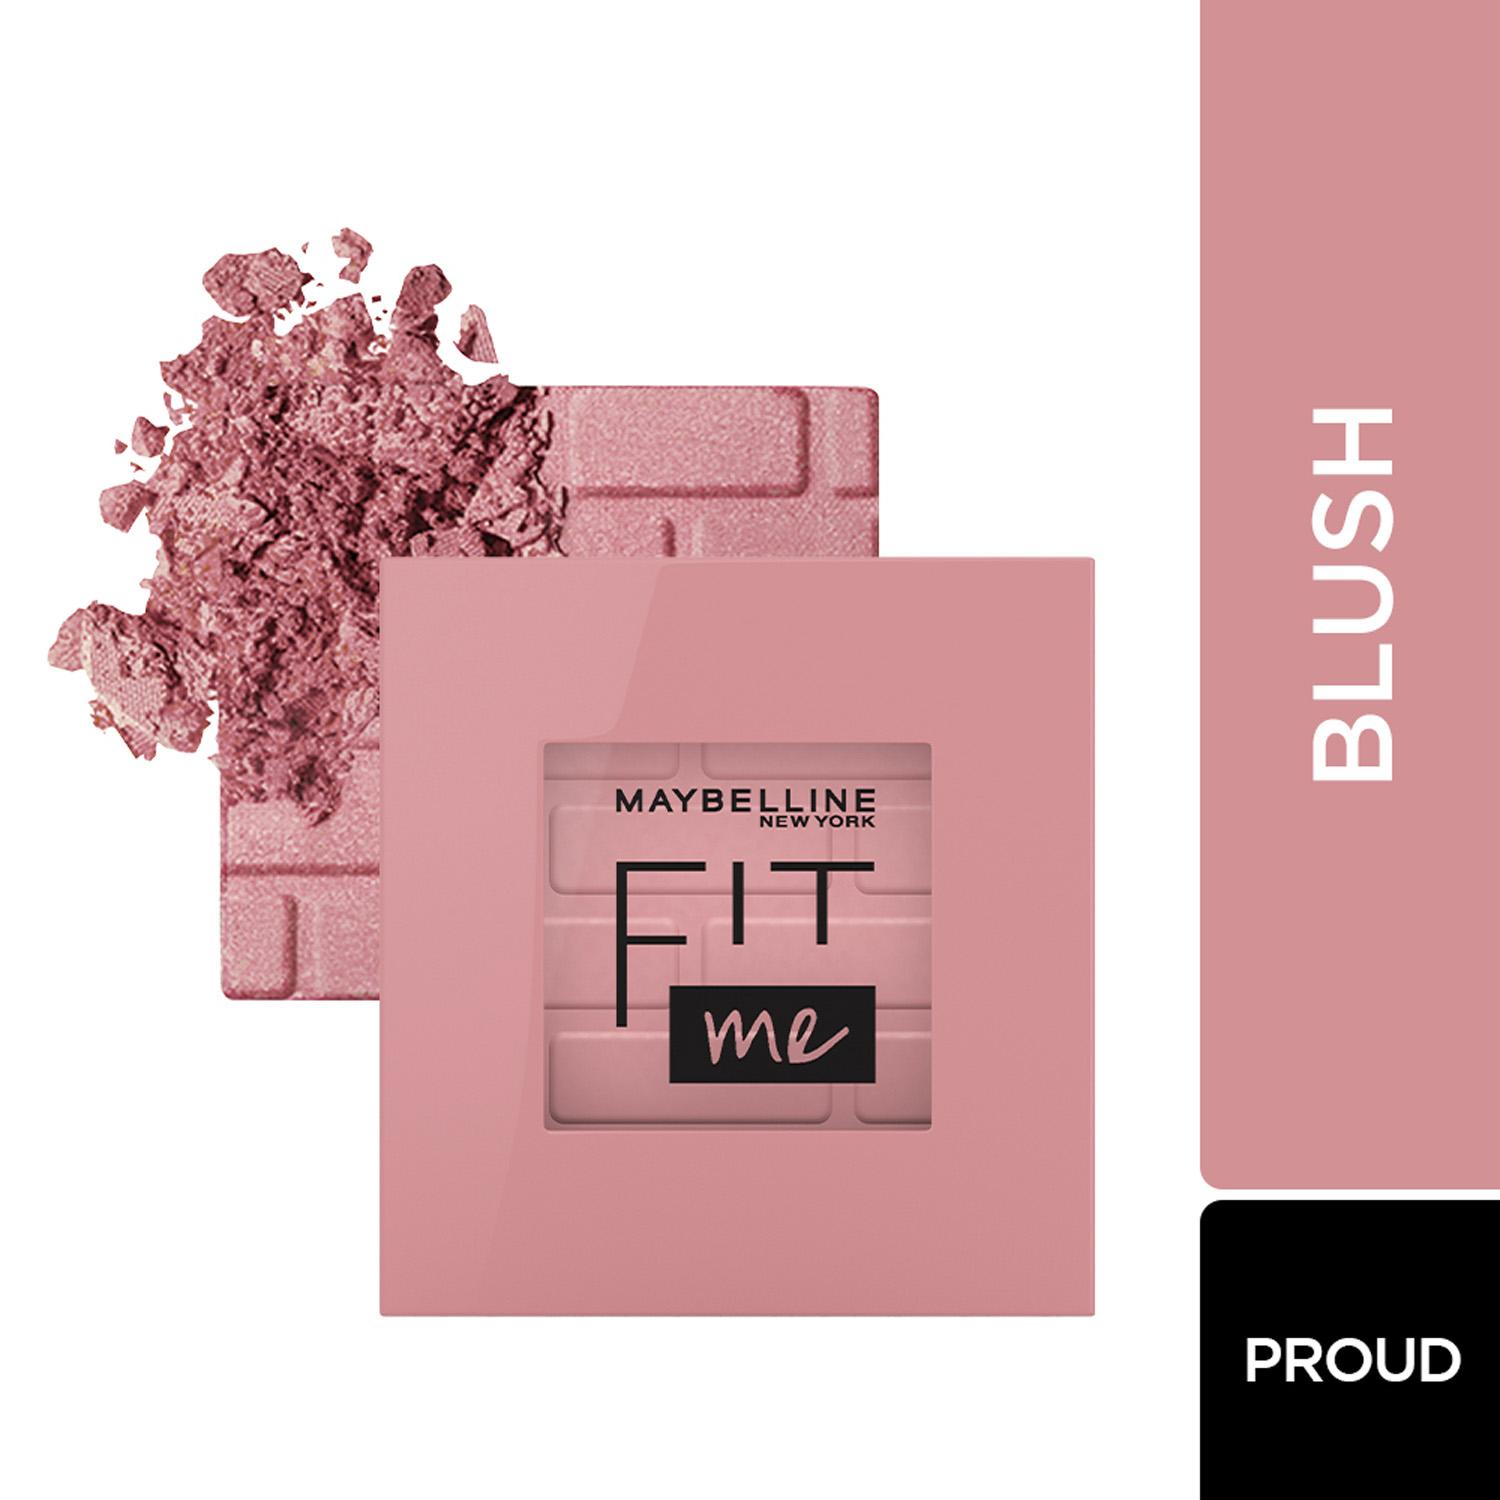 Maybelline New York | Maybelline New York Fit Me Mono Blush - 40 Proud (26.8g)